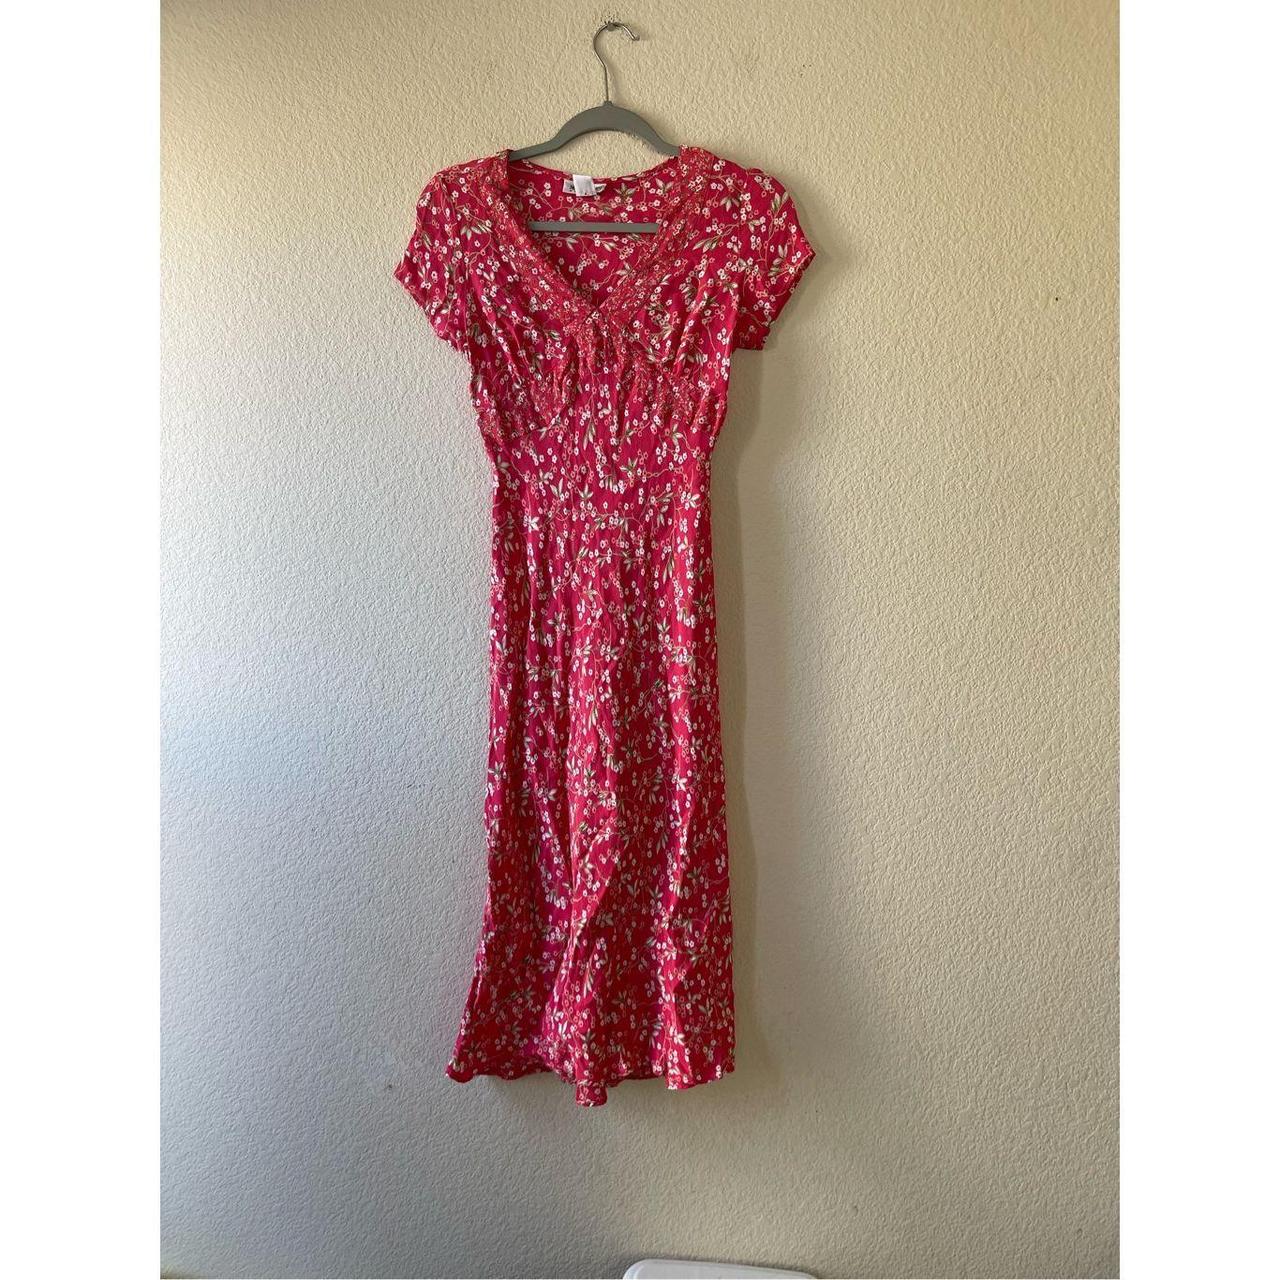 item listed by stitchshops